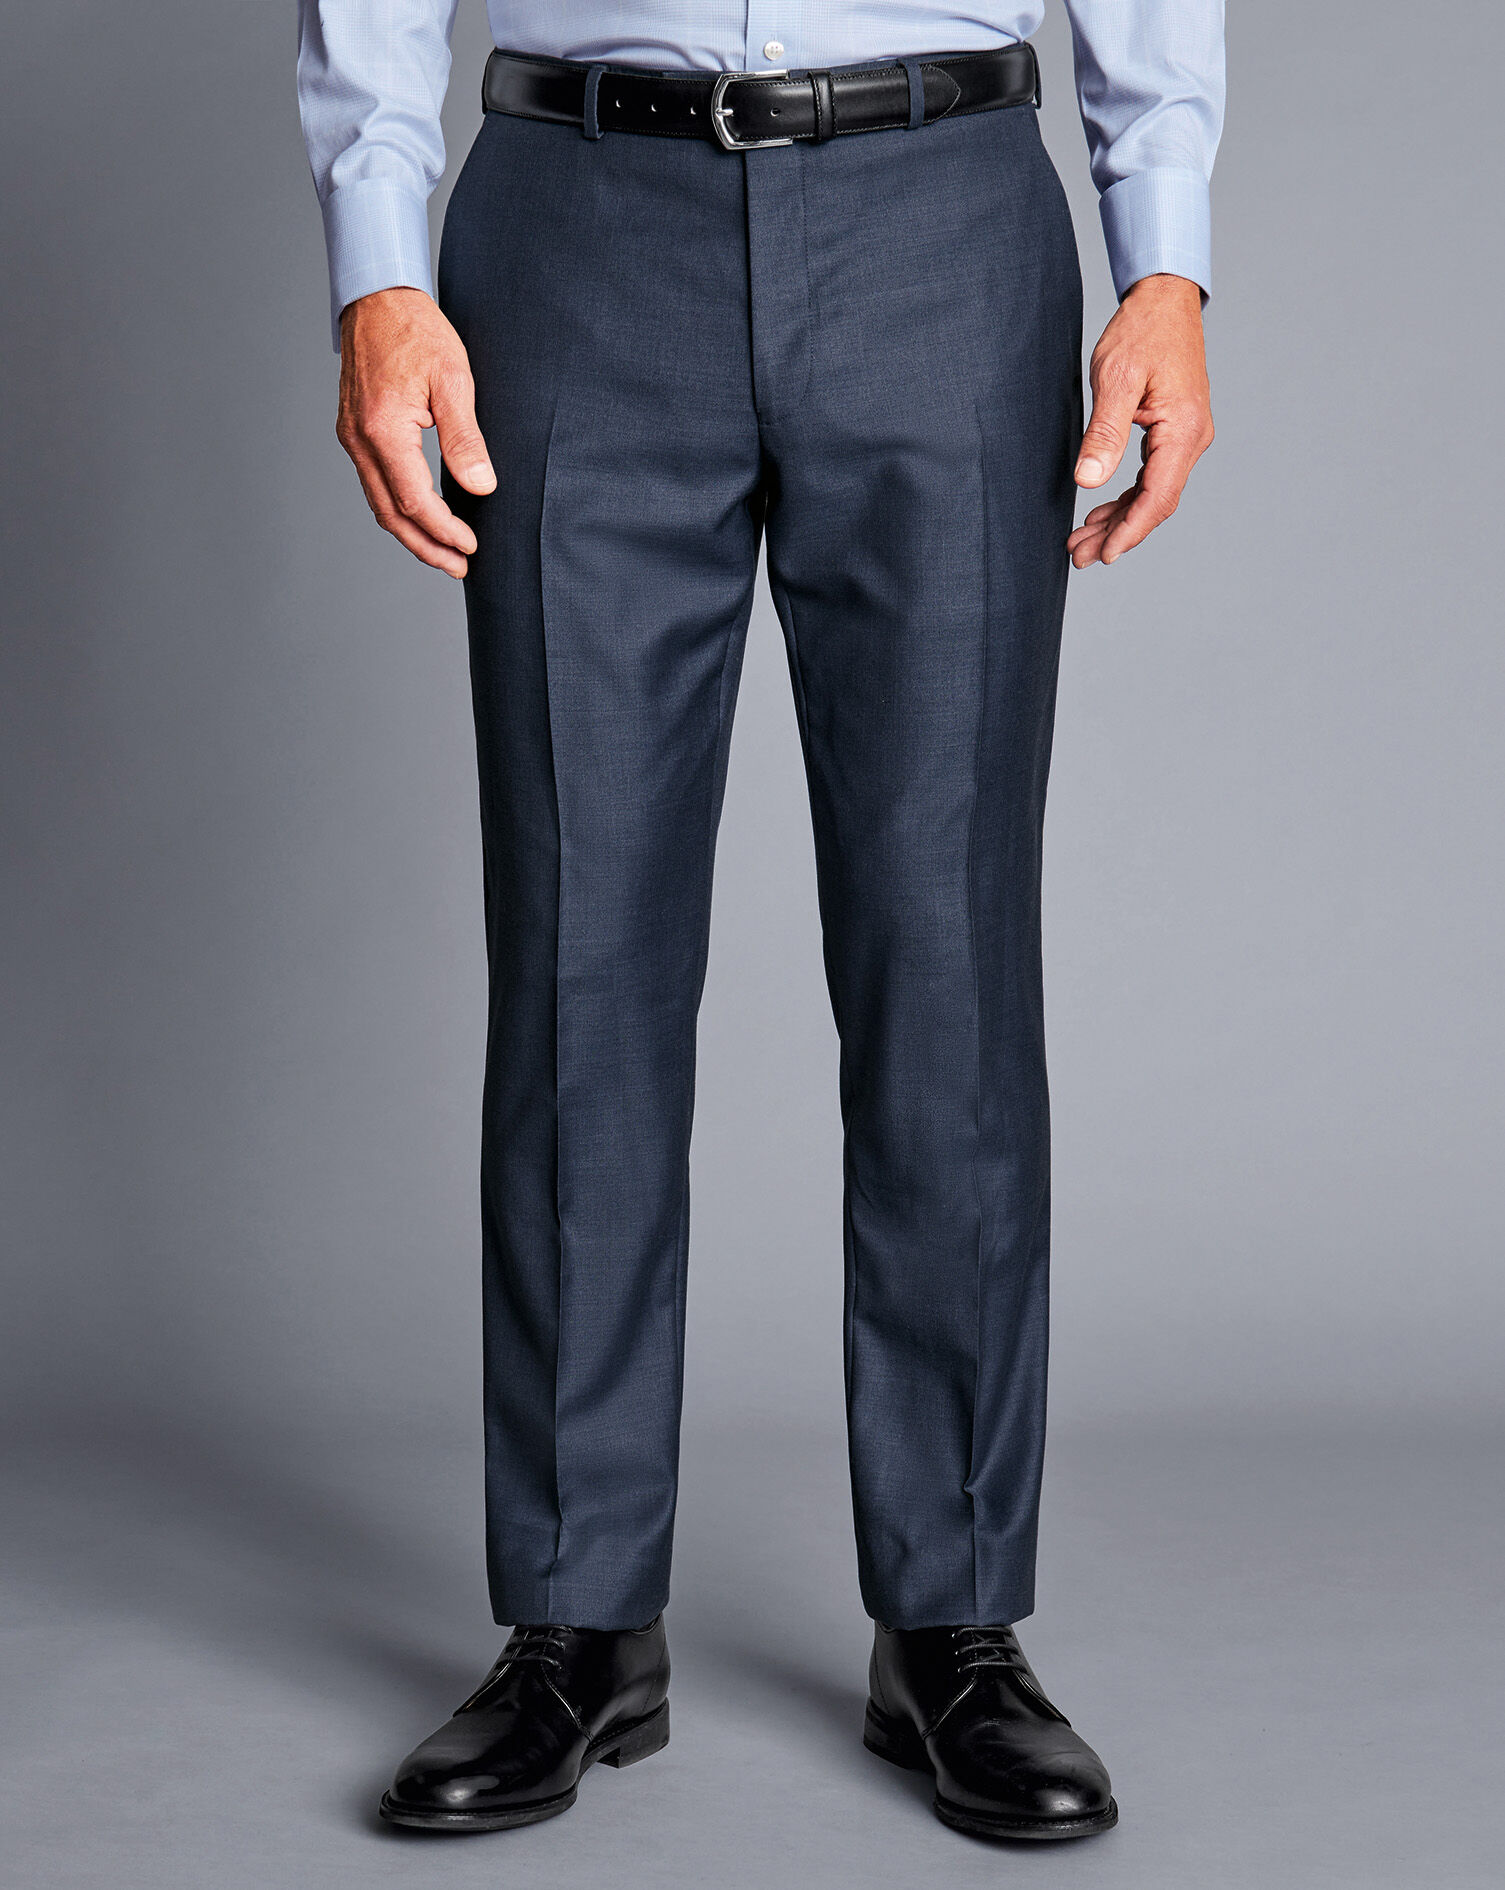 Browse Suits & Tuxedos for Men - Right Fit Guaranteed | Generation Tux